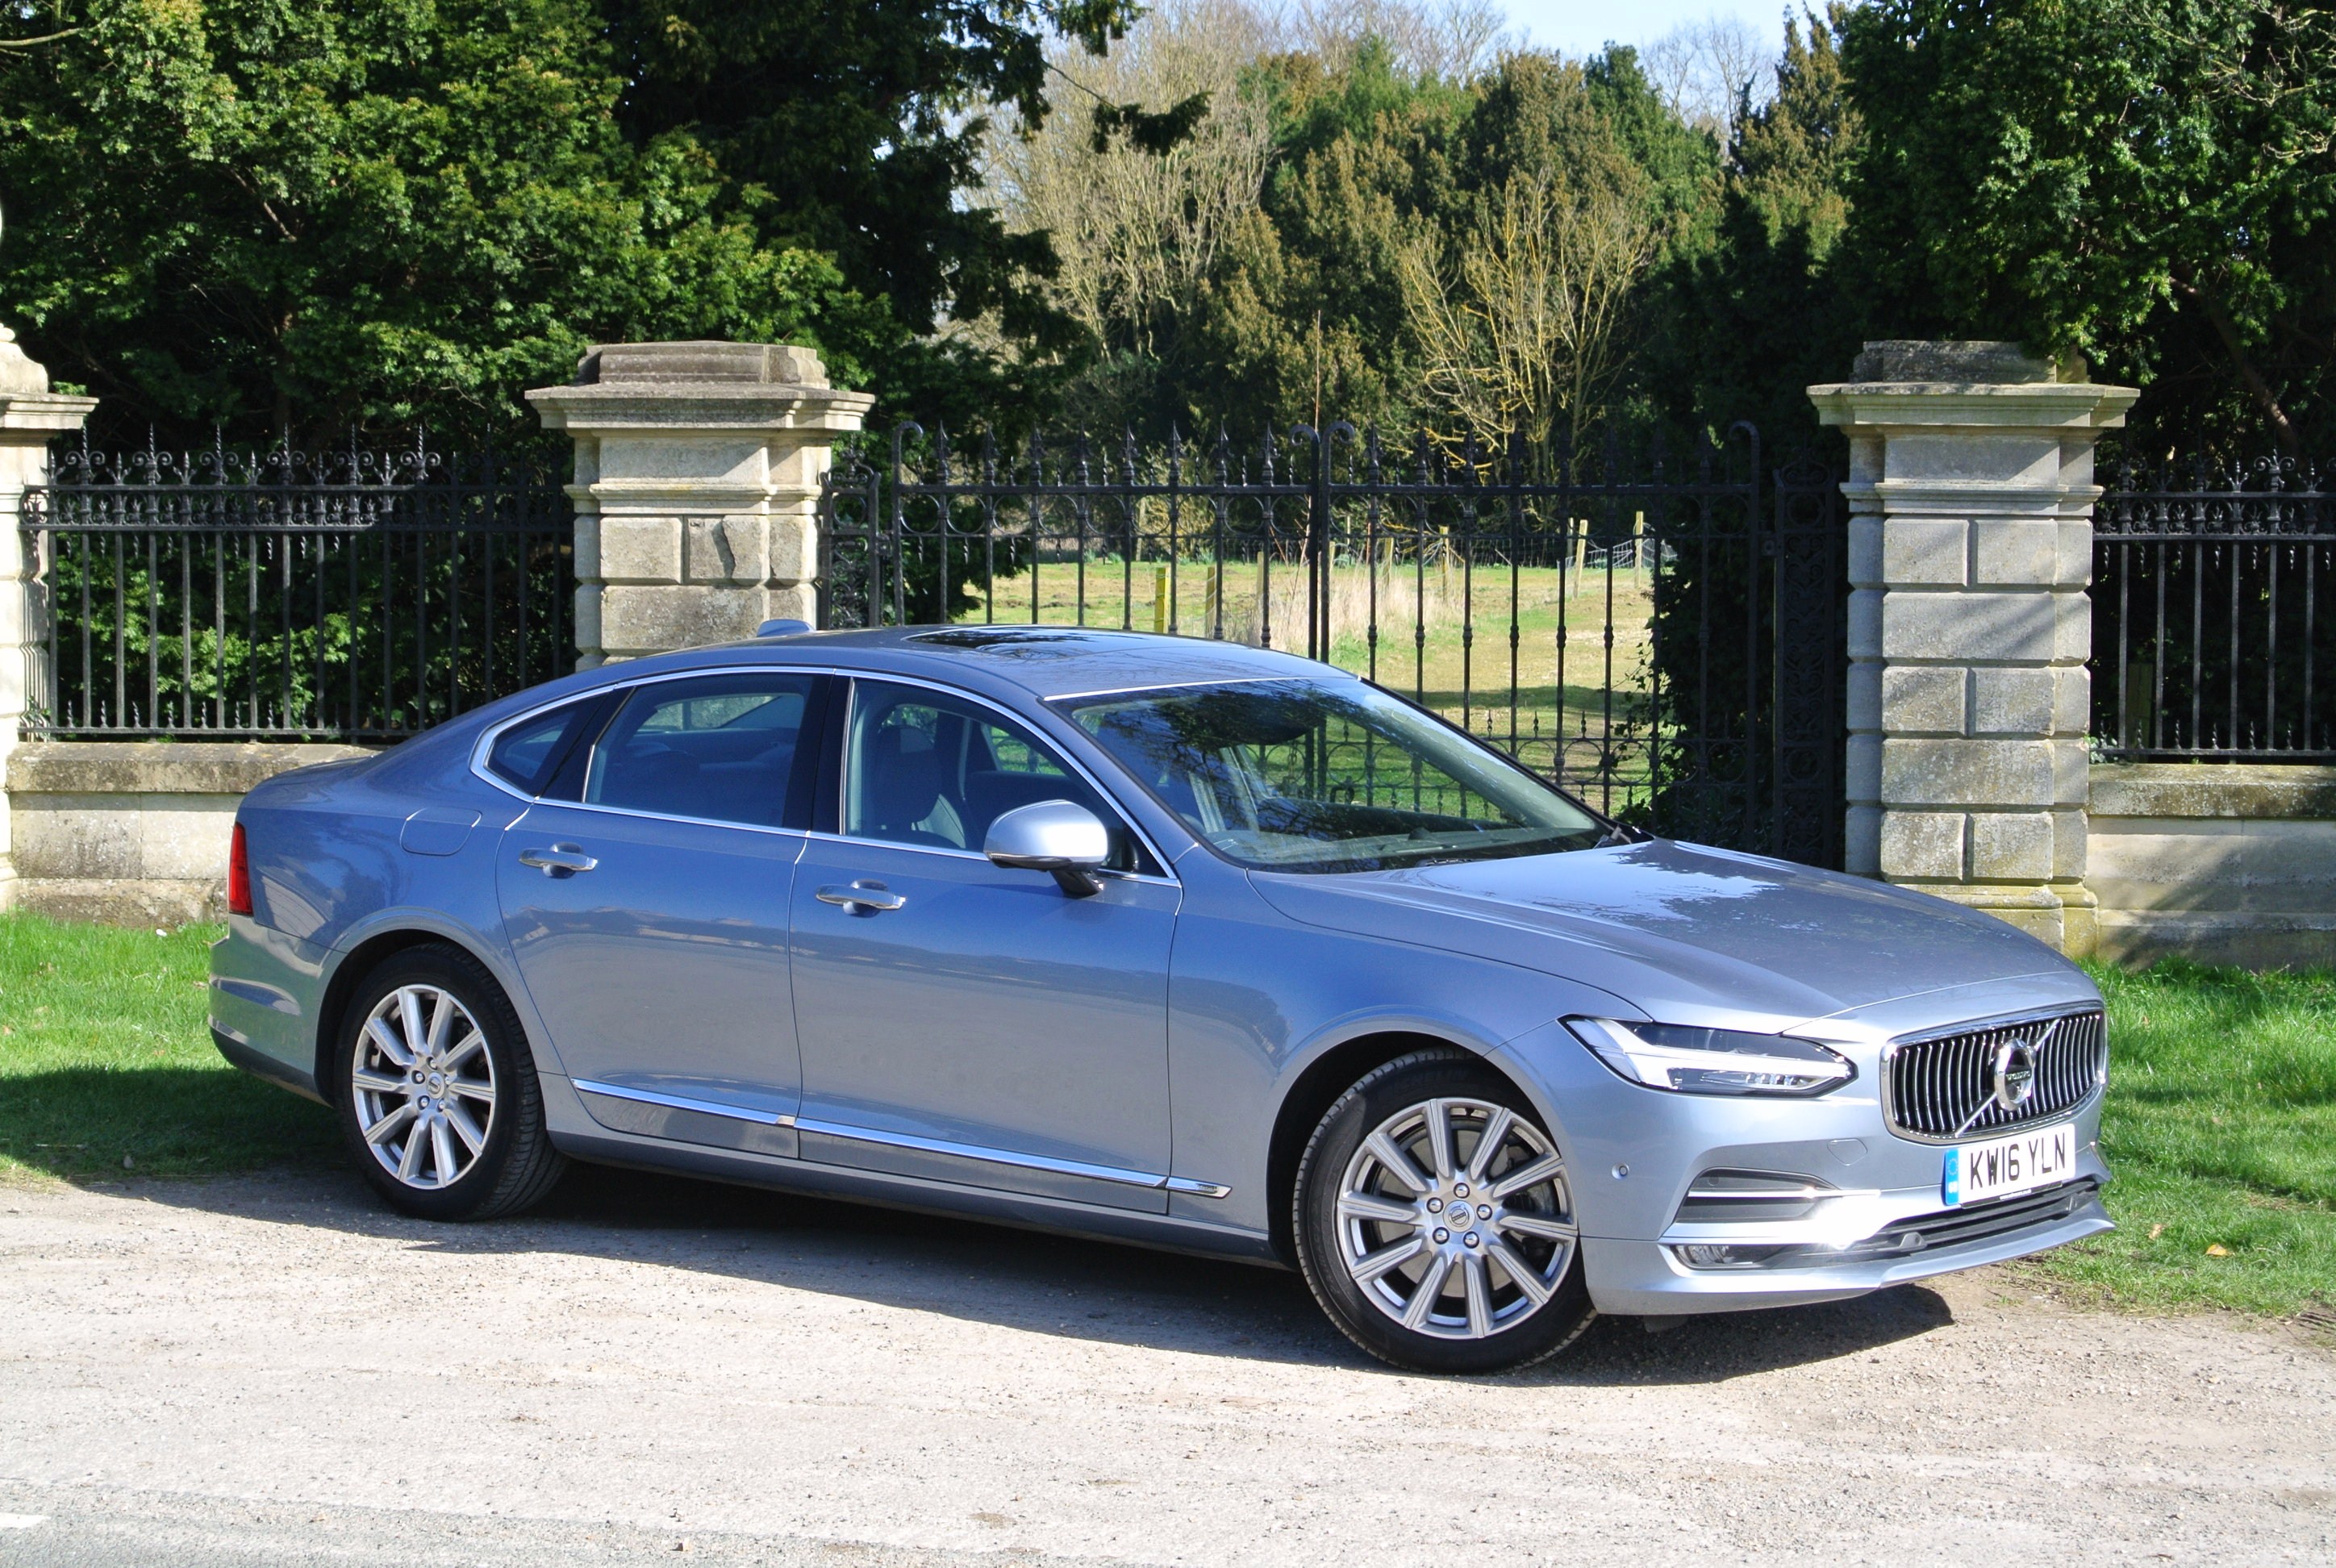 Elegant and classy, the latest Volvo S90 adds heat to the business sector